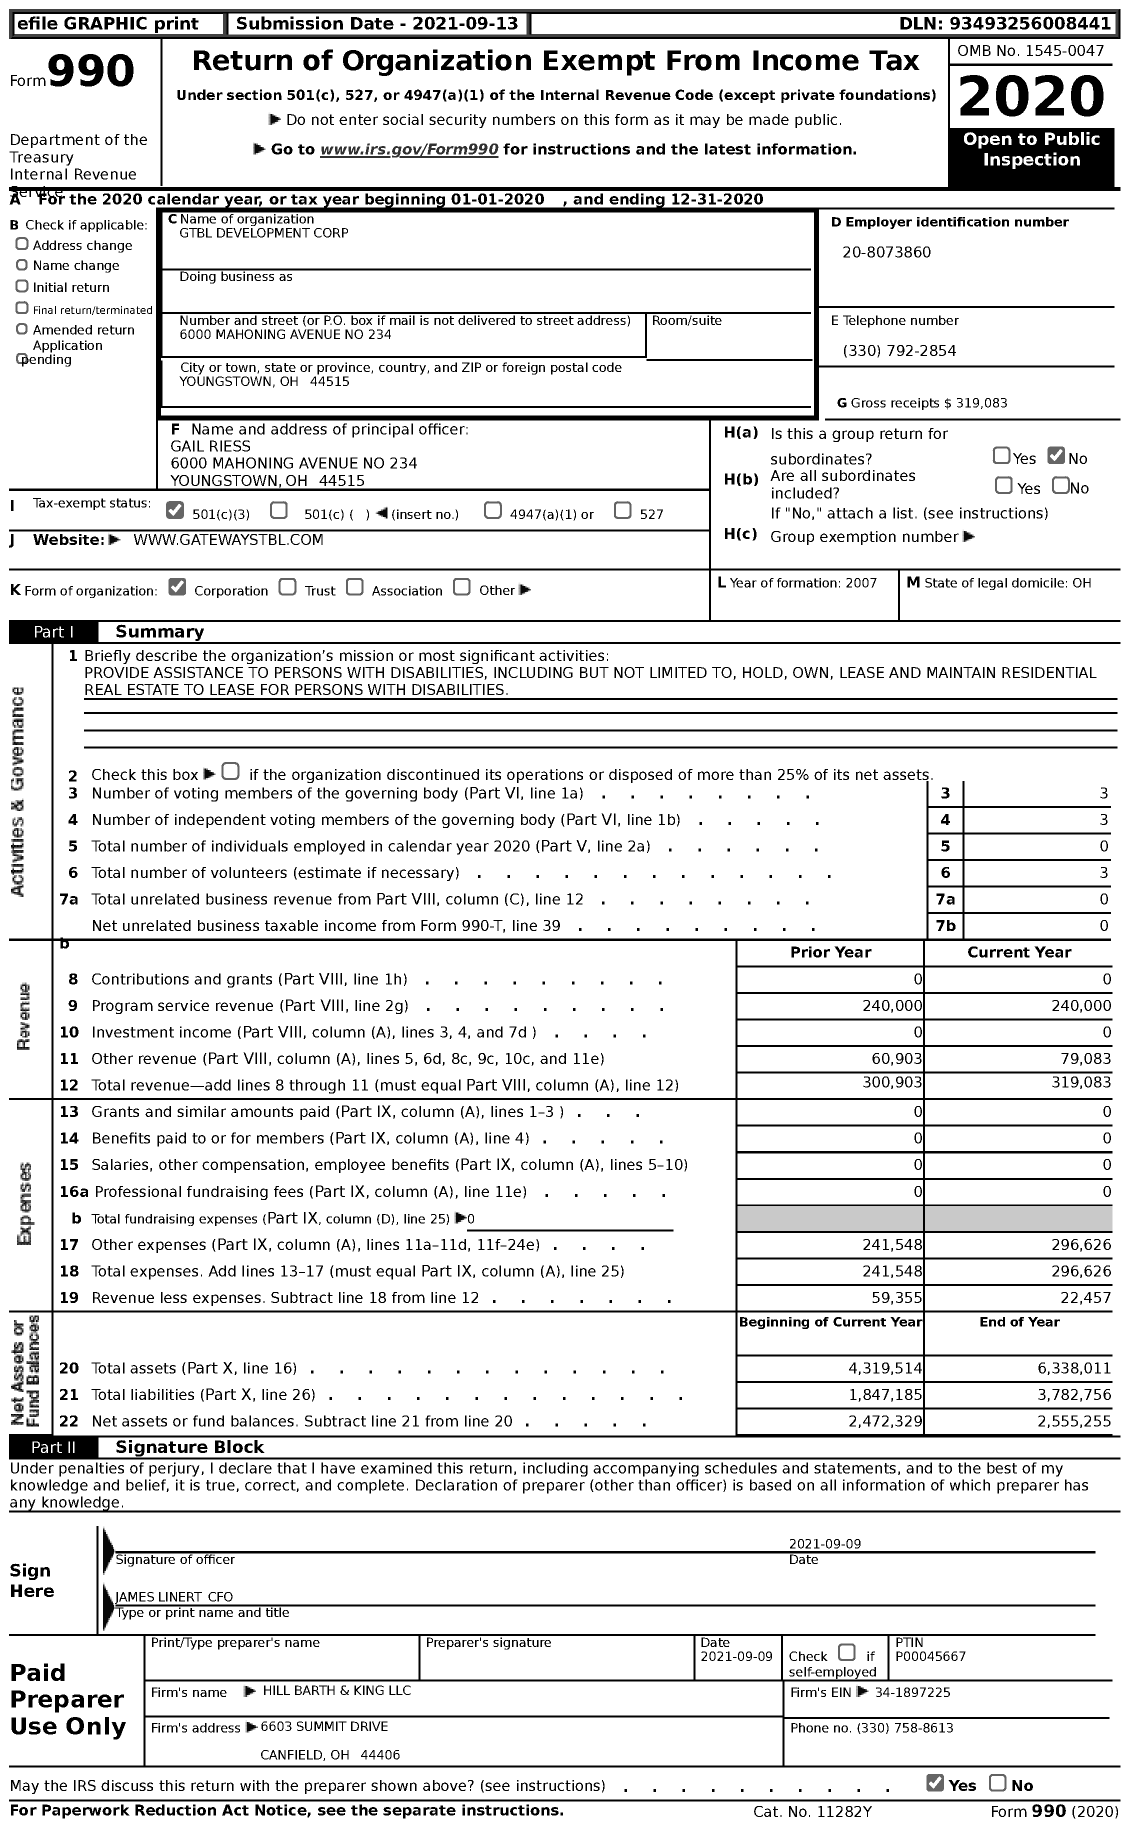 Image of first page of 2020 Form 990 for GTBL Development Corporation